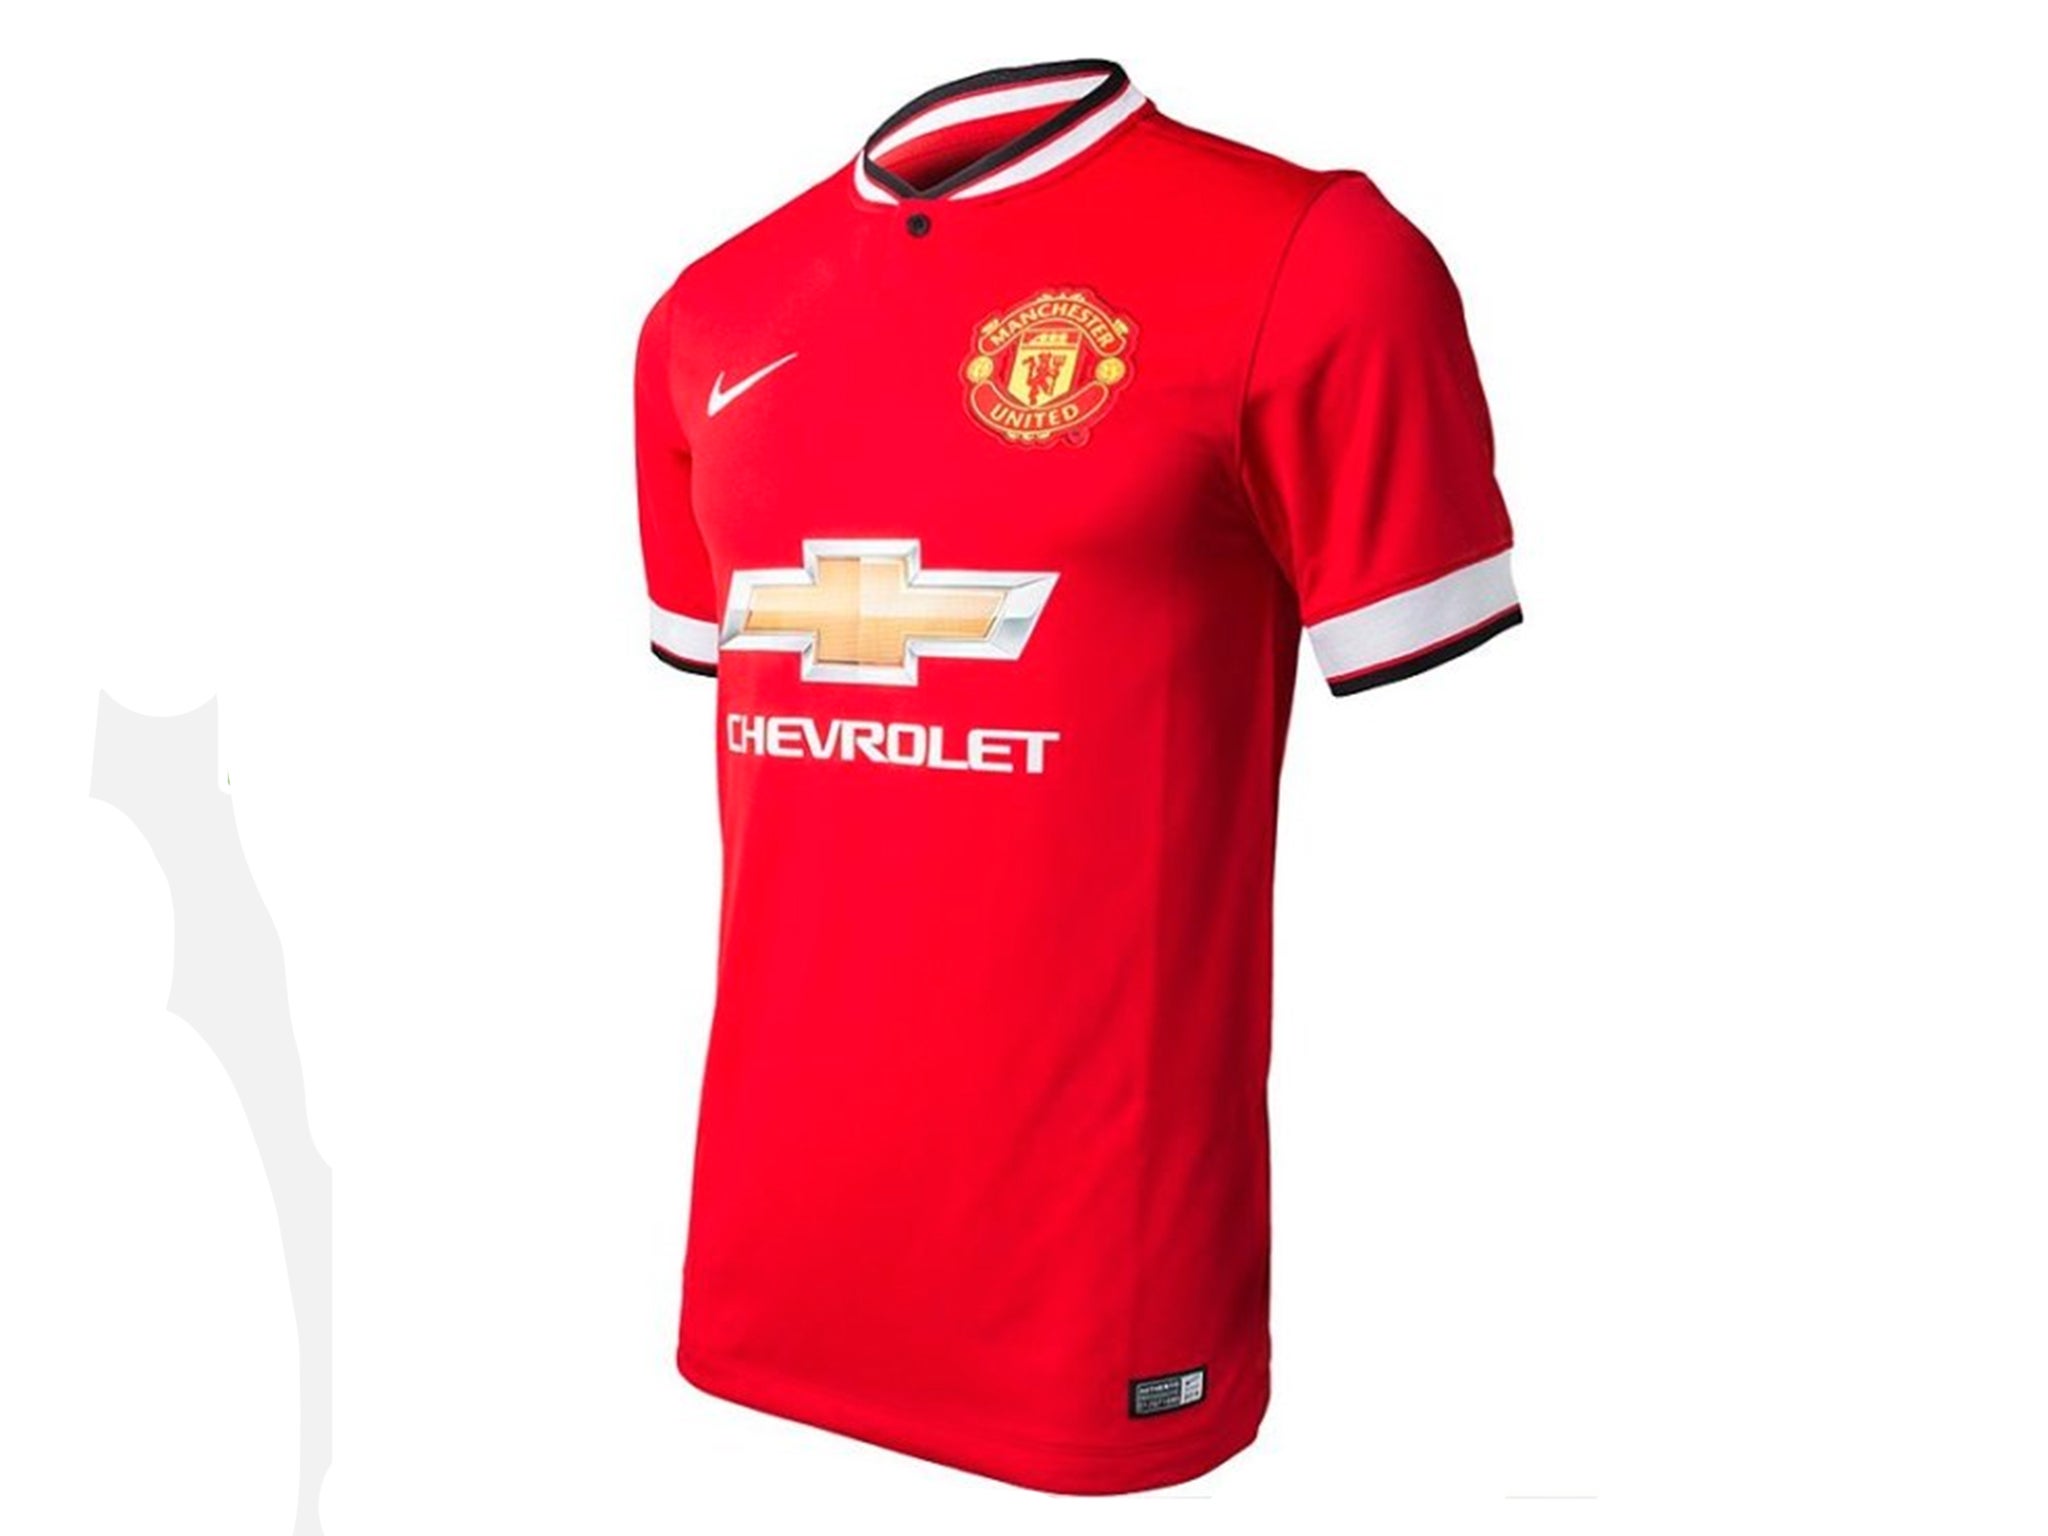 A leaked image purporting to be the new Manchester United shirt